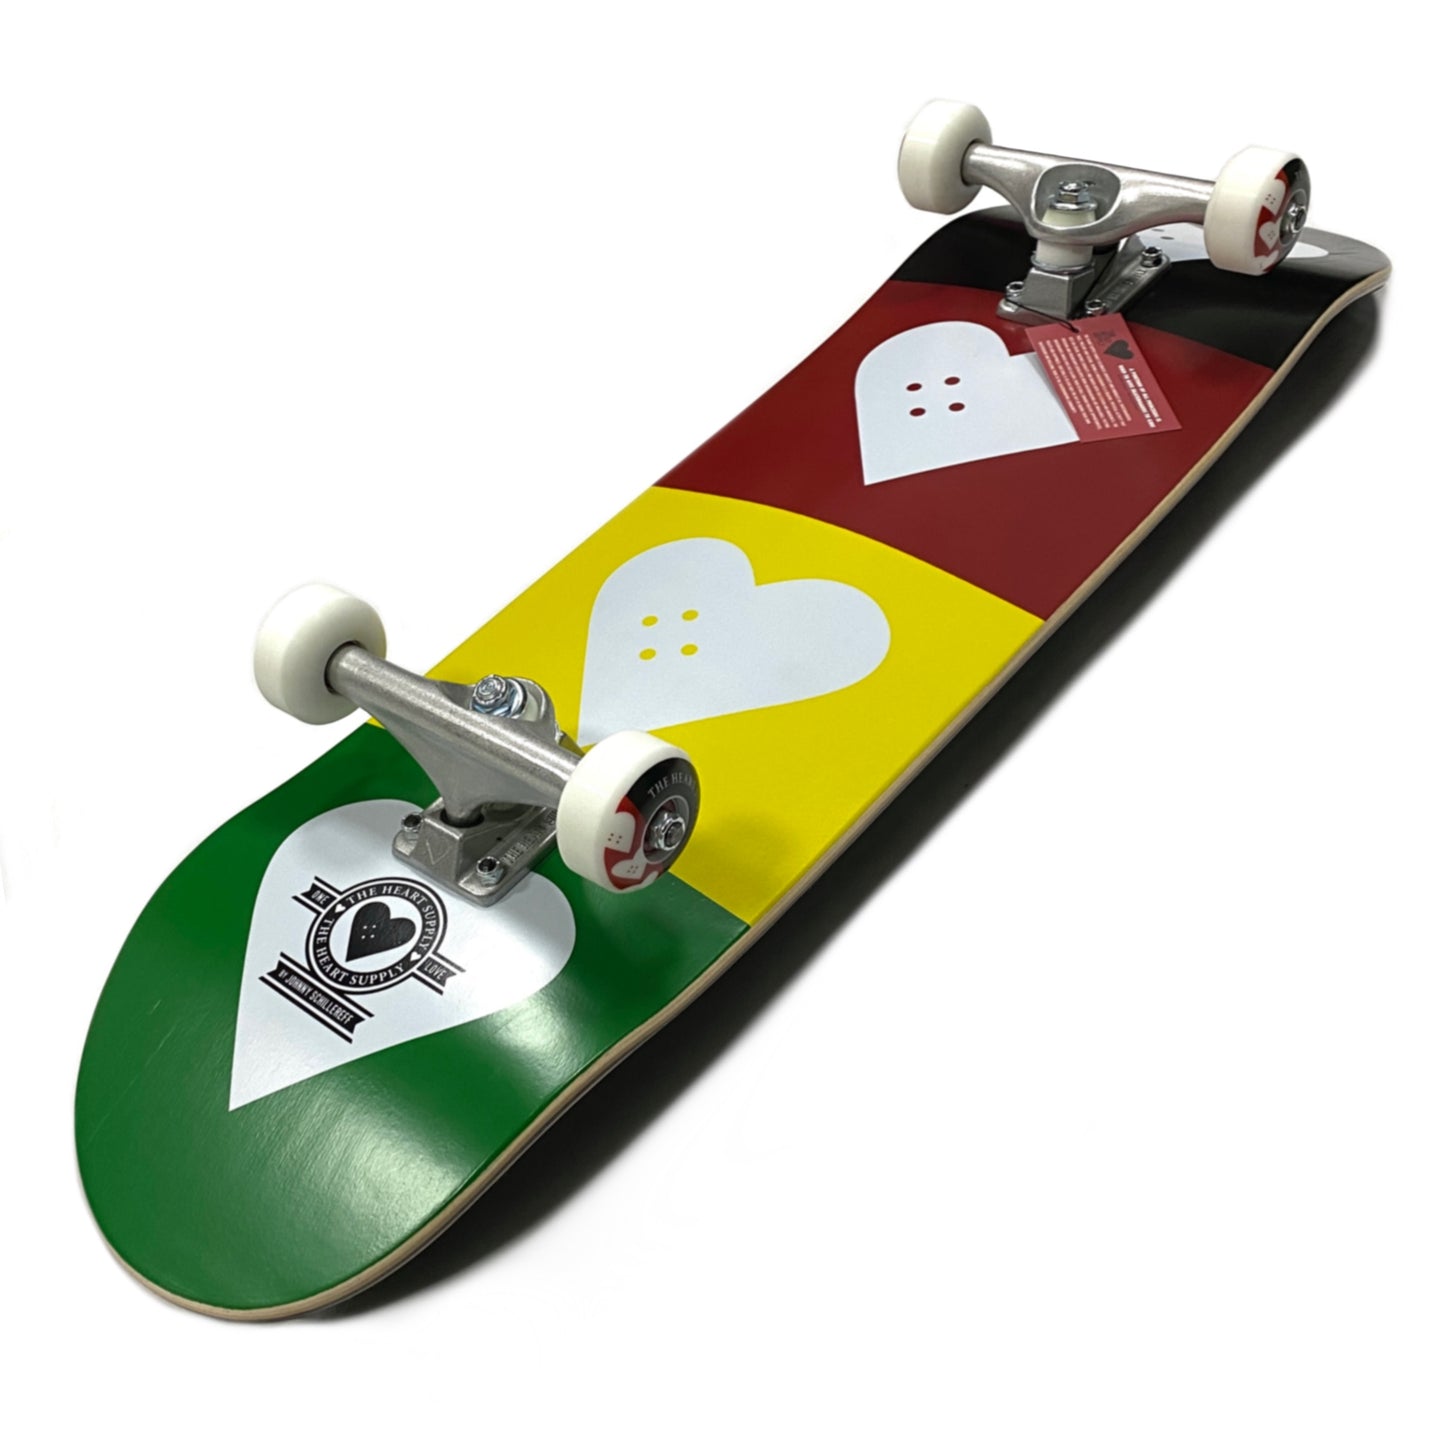 The Heart Supply Quad Logo Red, Gold & Green 8.25” Skateboard Complete